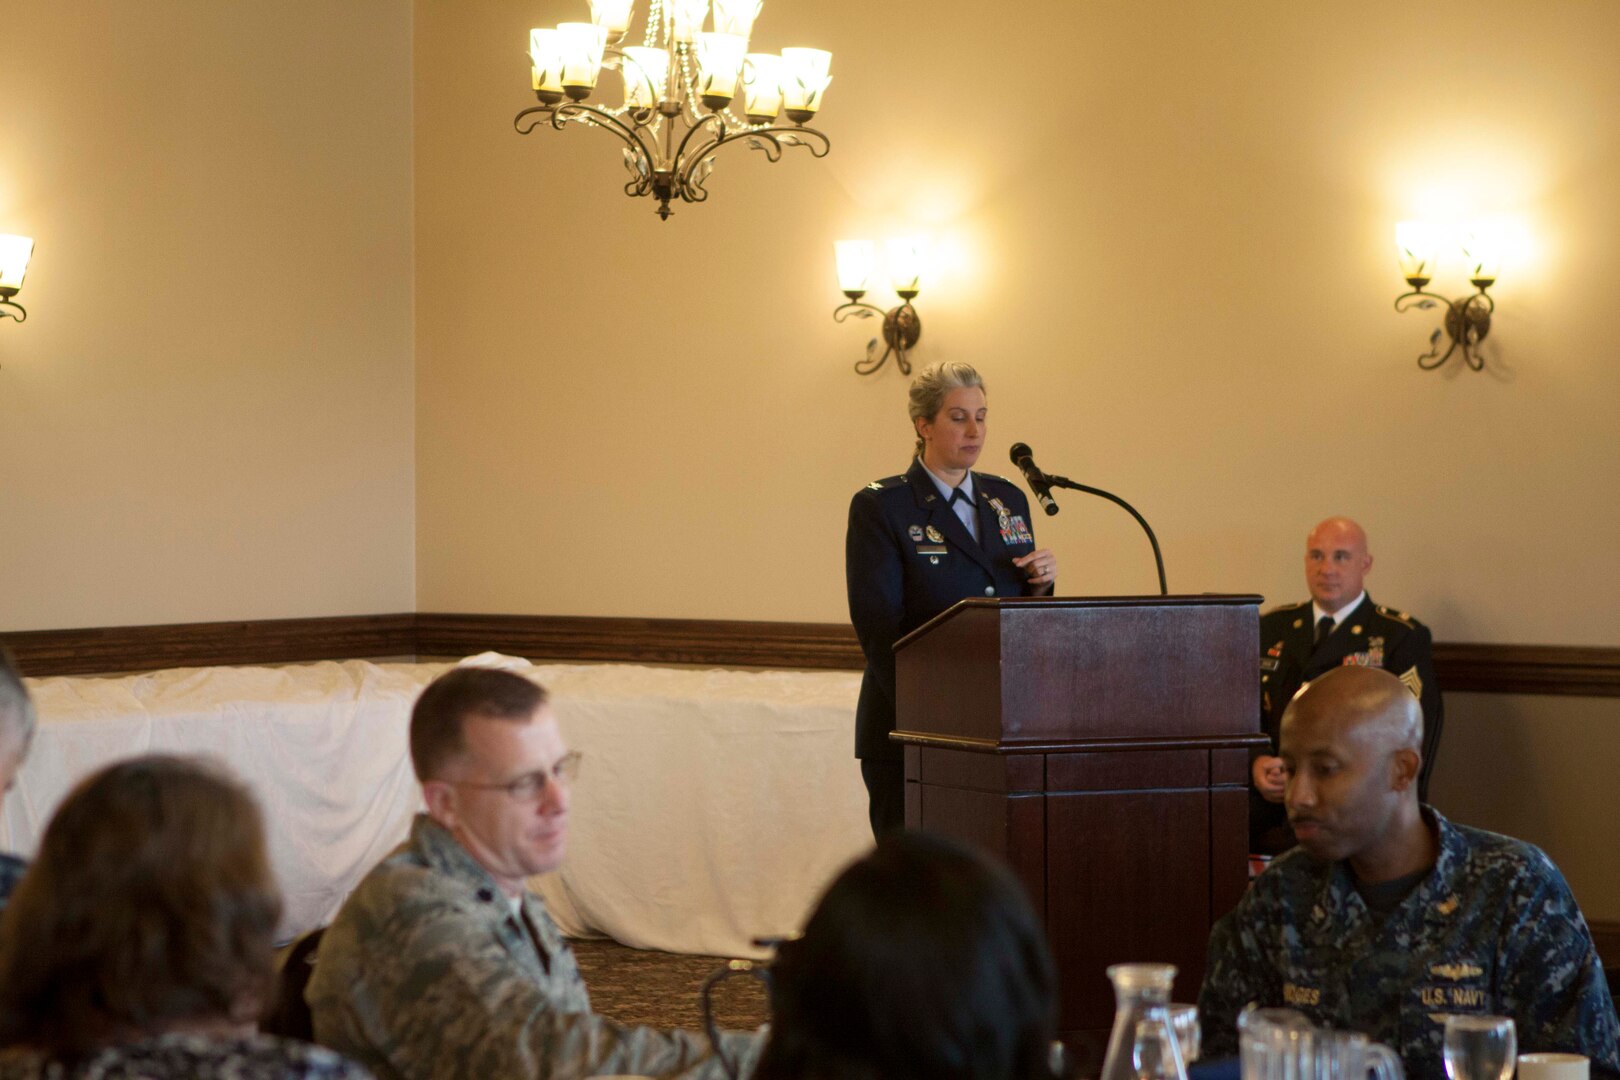 Air Force Col. Karen D. Stoff speaks to friends, coworkers and DLA Distribution leadership at her retirement ceremony on Thursday, Oct. 8, at the Susquehanna Club, New Cumberland, Pa. Air Force Col. Karen D. Stoff speaks to friends, coworkers and DLA Distribution leadership at her retirement ceremony on Thursday, Oct. 8, at the Susquehanna Club, New Cumberland, Pa. 
 
